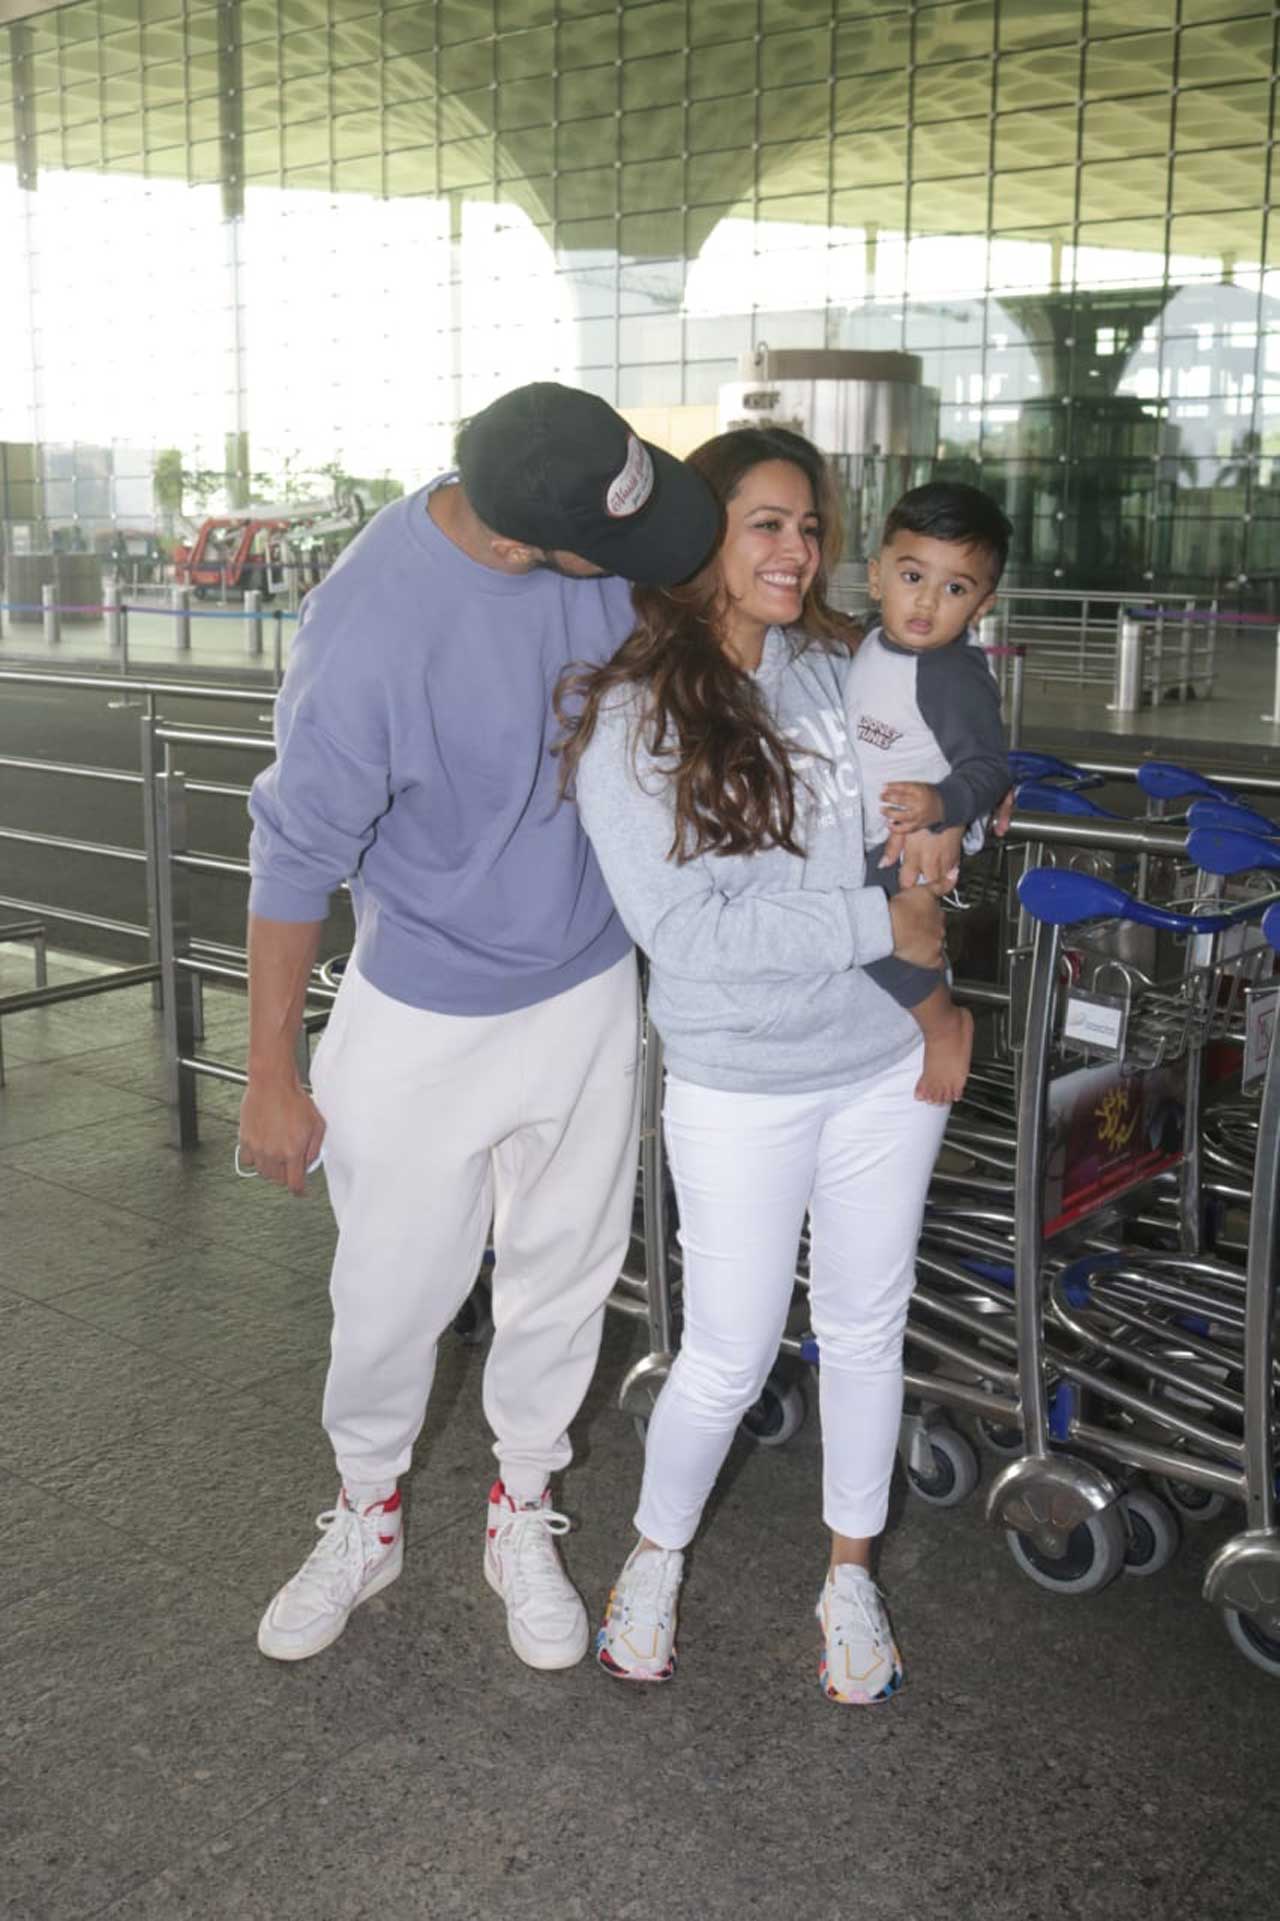 In February this year, Anita Hassanandani and husband Rohit Reddy announced the arrival of their bundle of joy Aaravv. Since then, the couple has been sharing adorable pictures and videos of the toddler on social media, making him a familiar face among their fans and followers.   